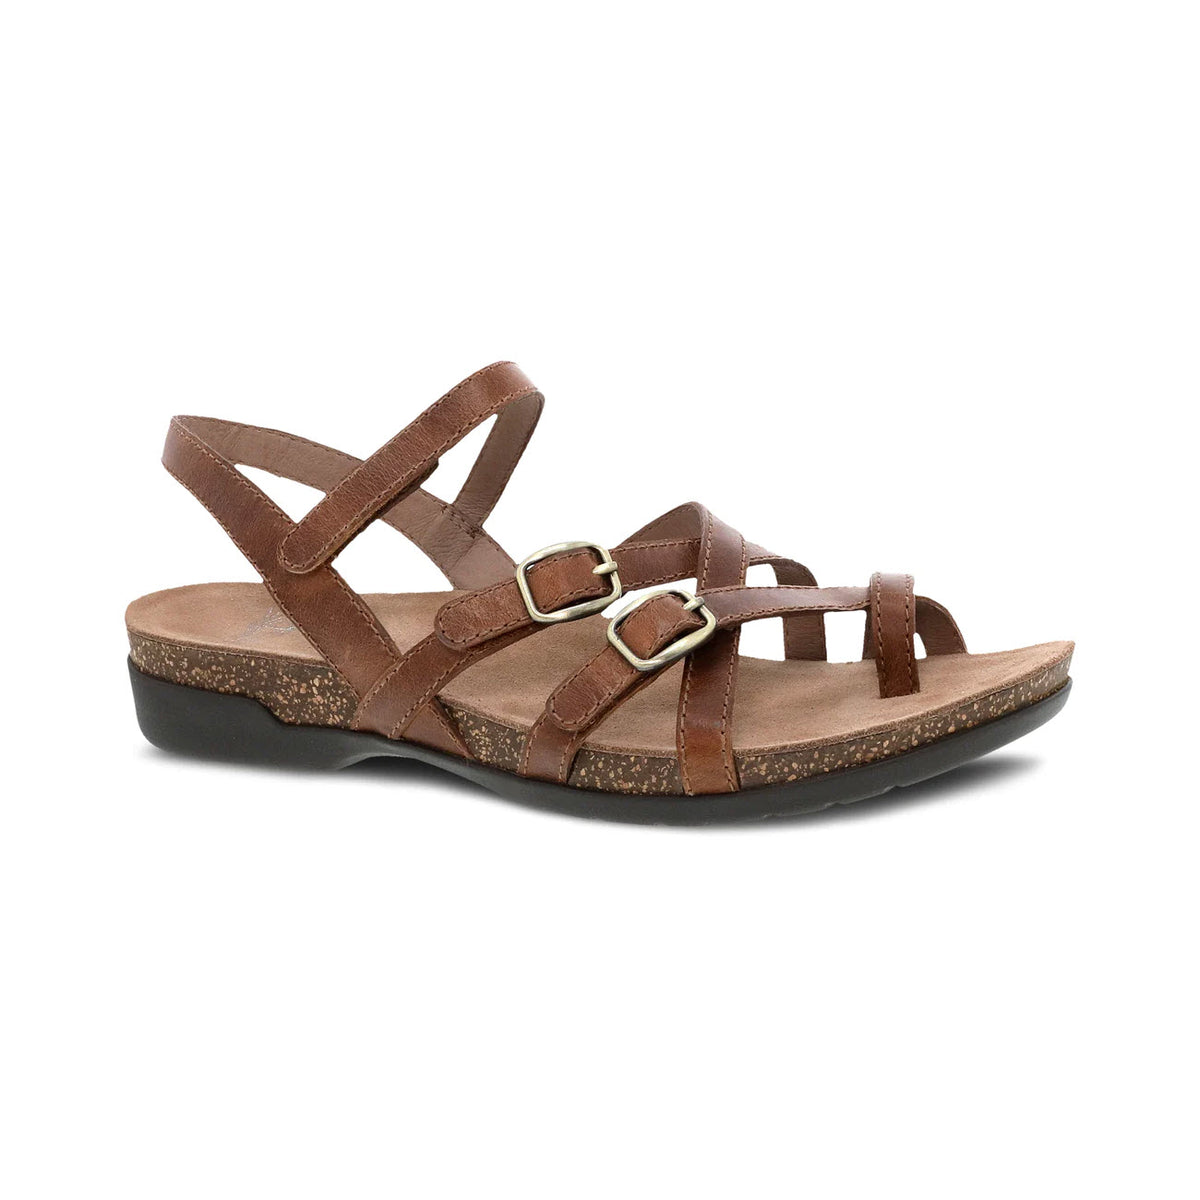 Dansko Roslyn Tan - Womens strappy leather sandal with fashionable straps and a buckle closure on a white background.